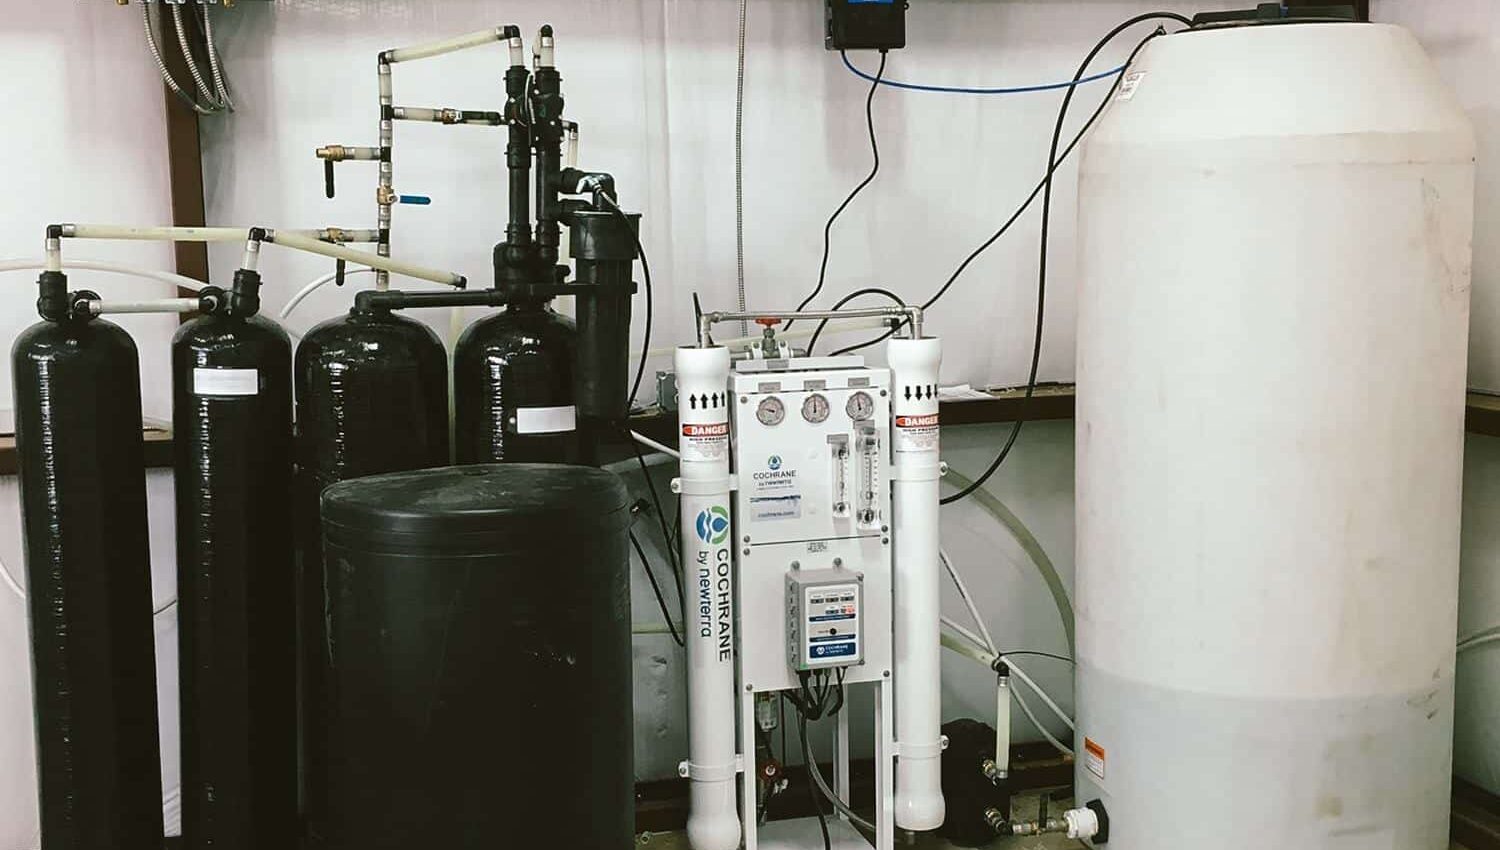 kinetico's commercial water softening system